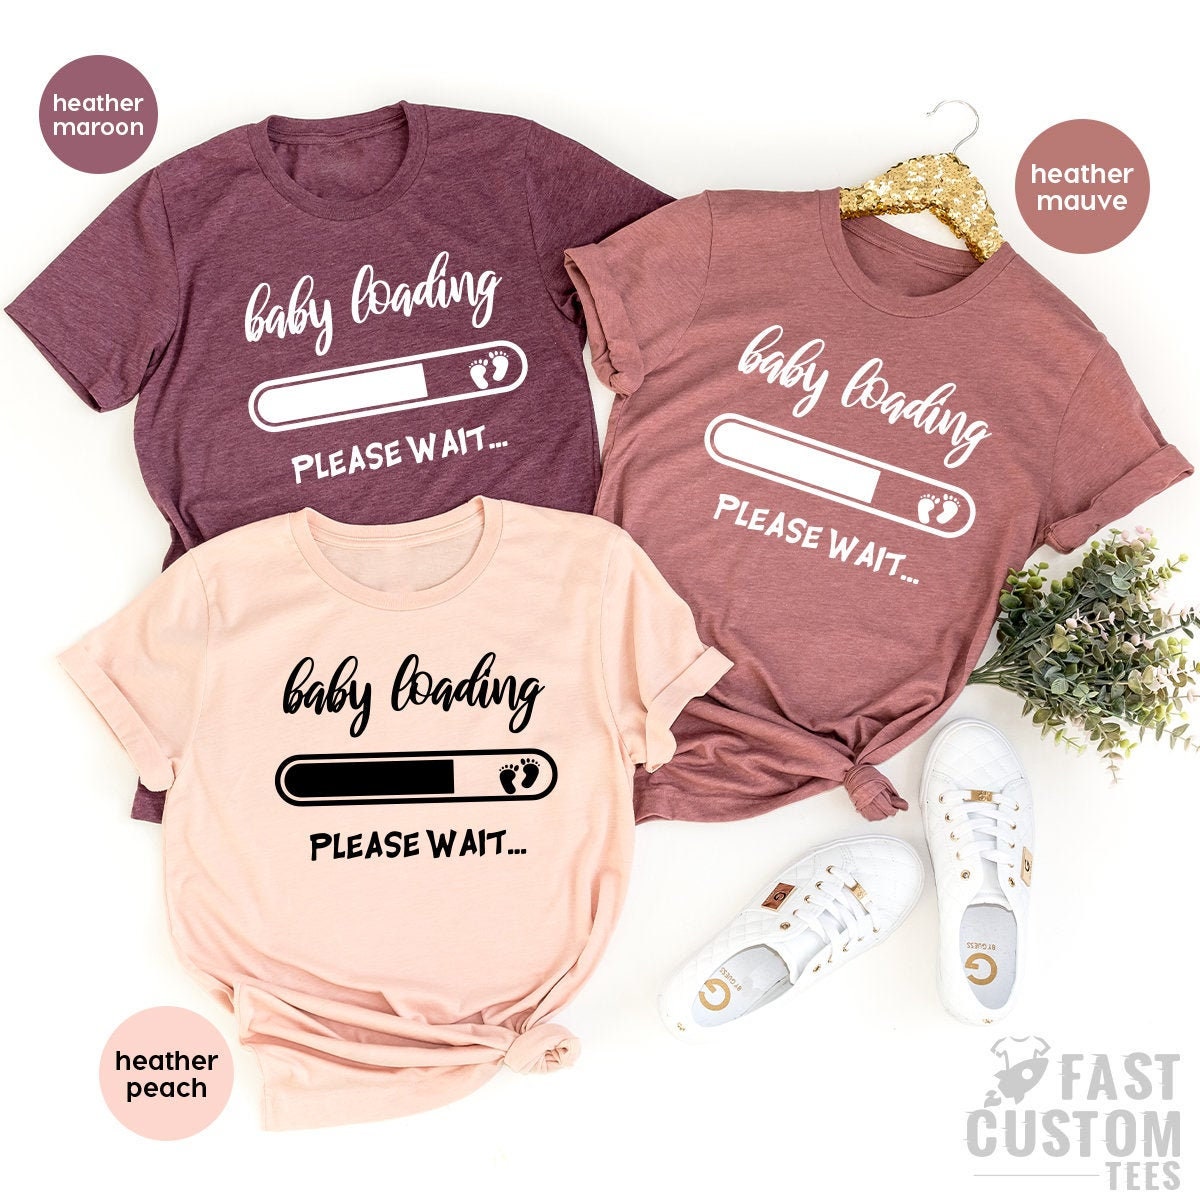 18 Cute Pregnancy Outfits 2019 — Best Maternity Fashion to Shop